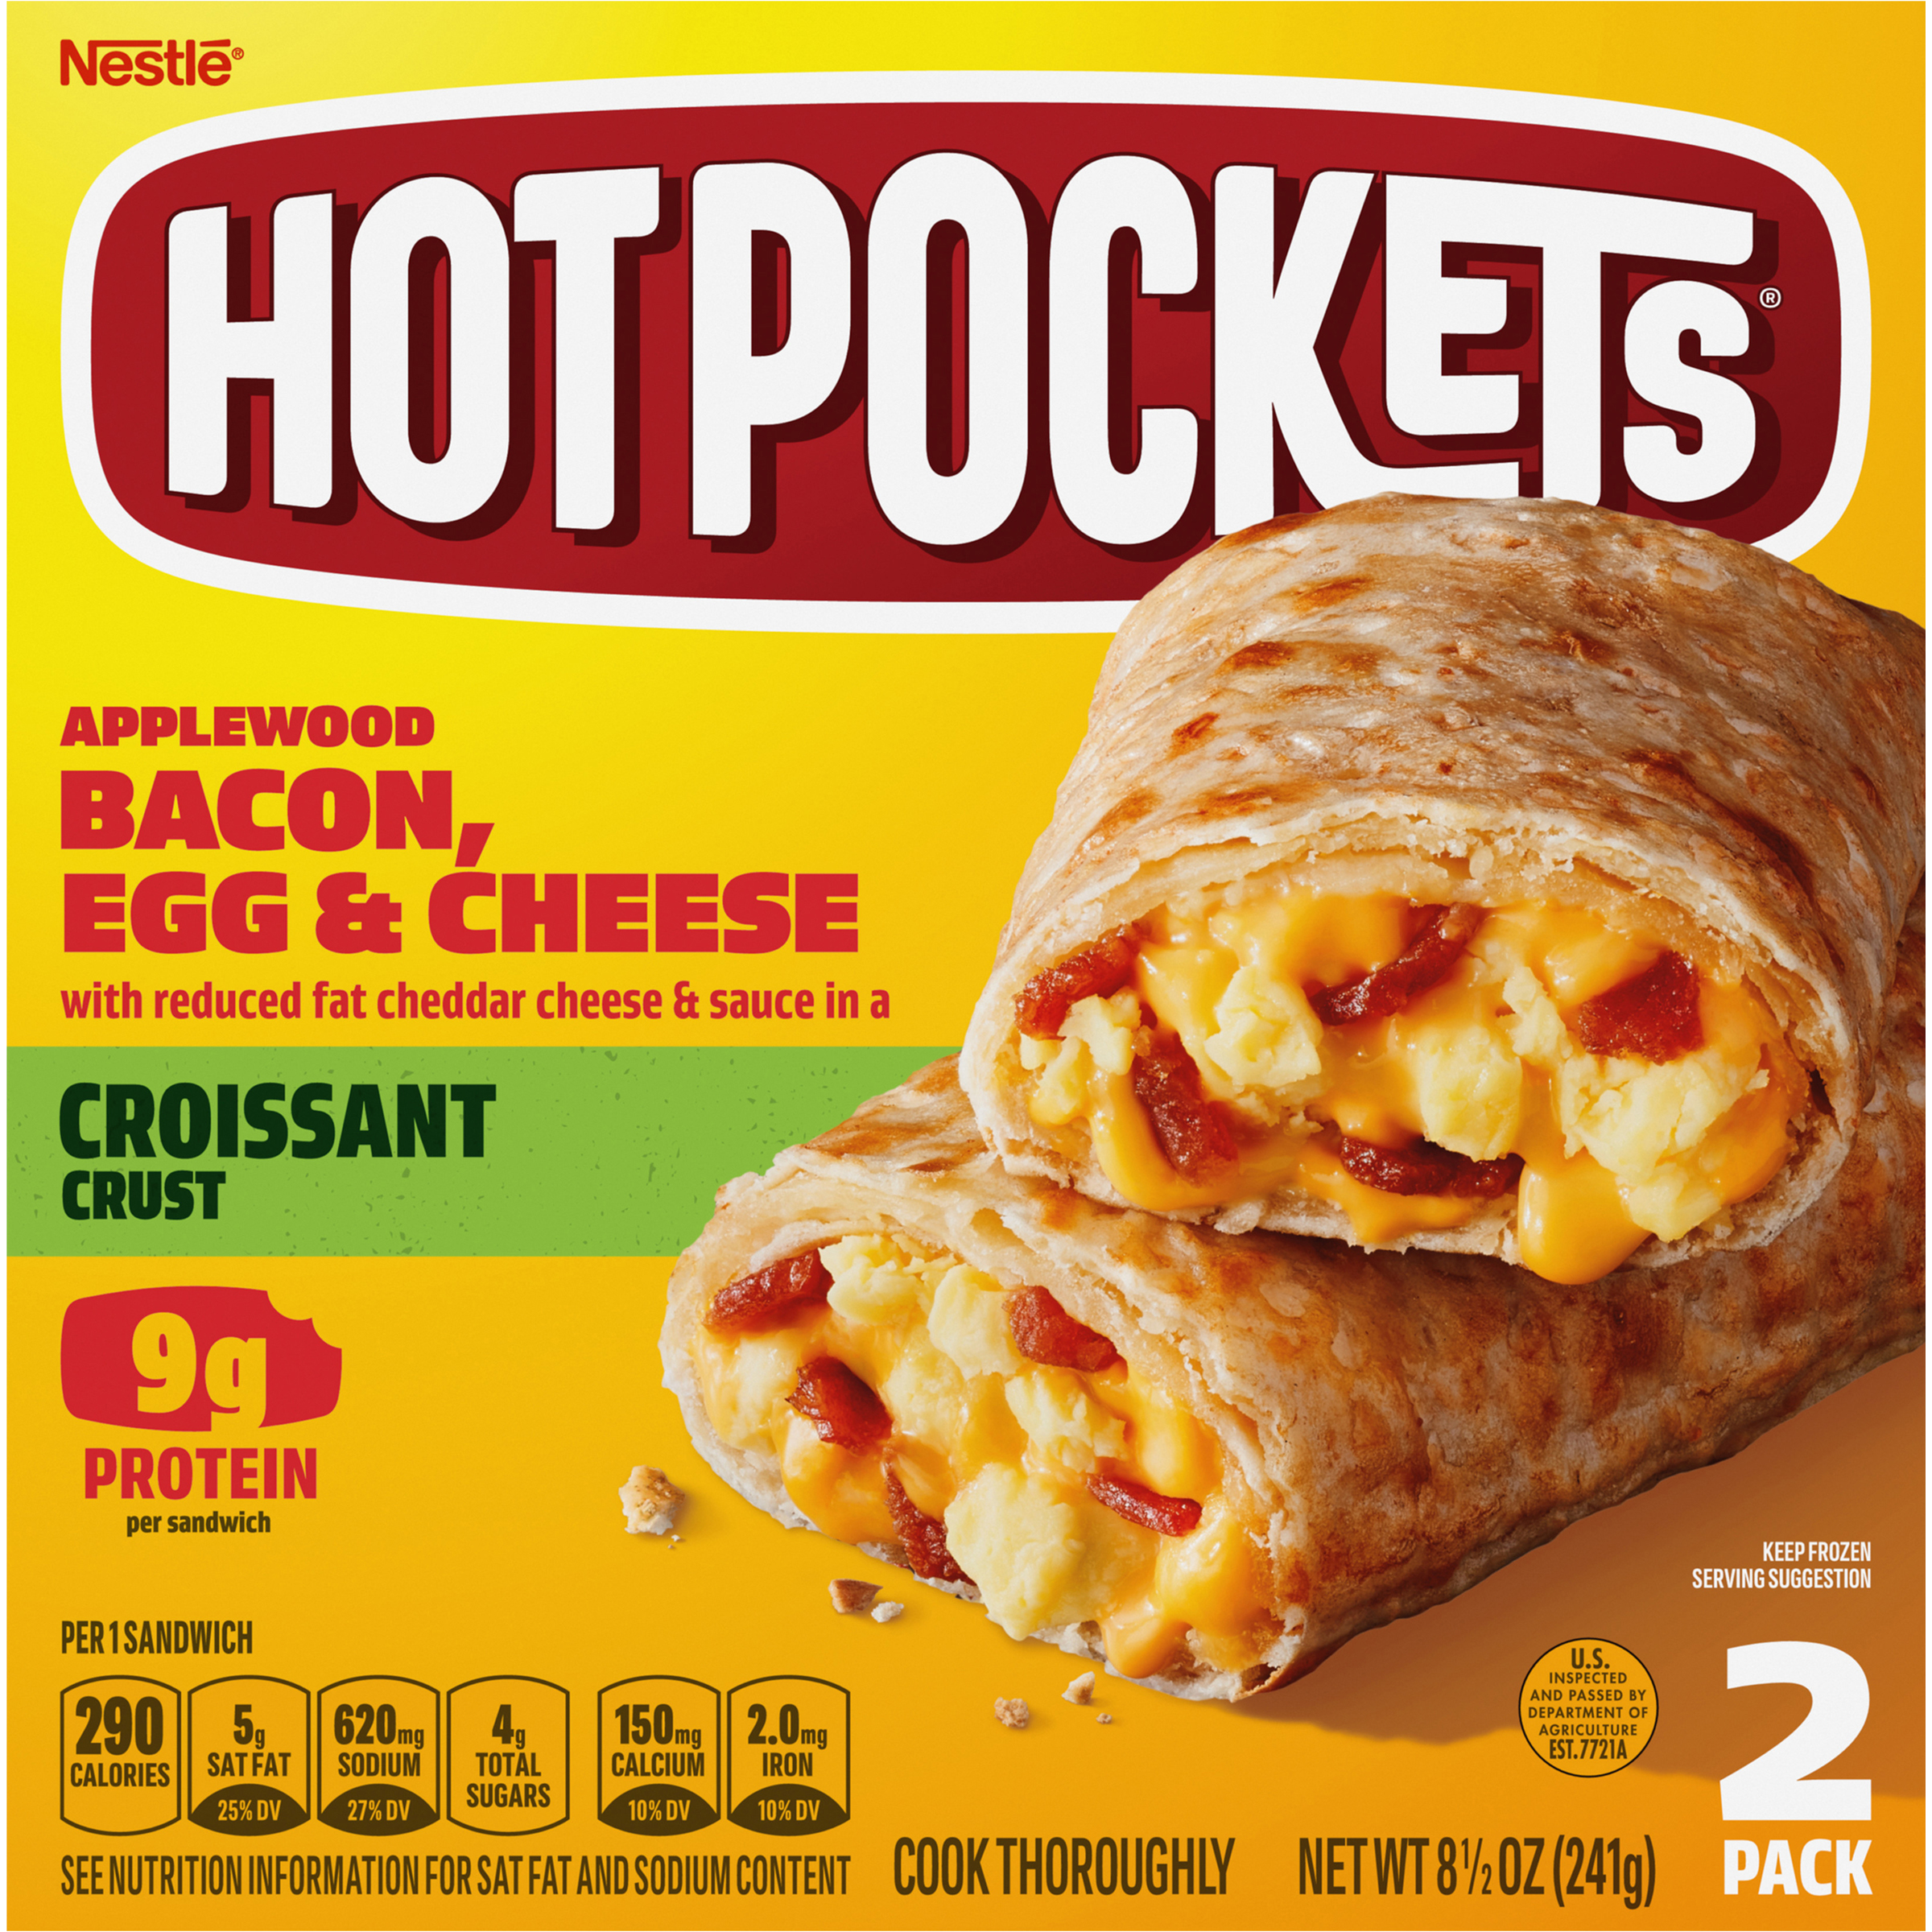 HOT POCKETS Croissant Crust Applewood Bacon, Egg, & Cheese (2 Pack) 8 units per case 8.5 oz